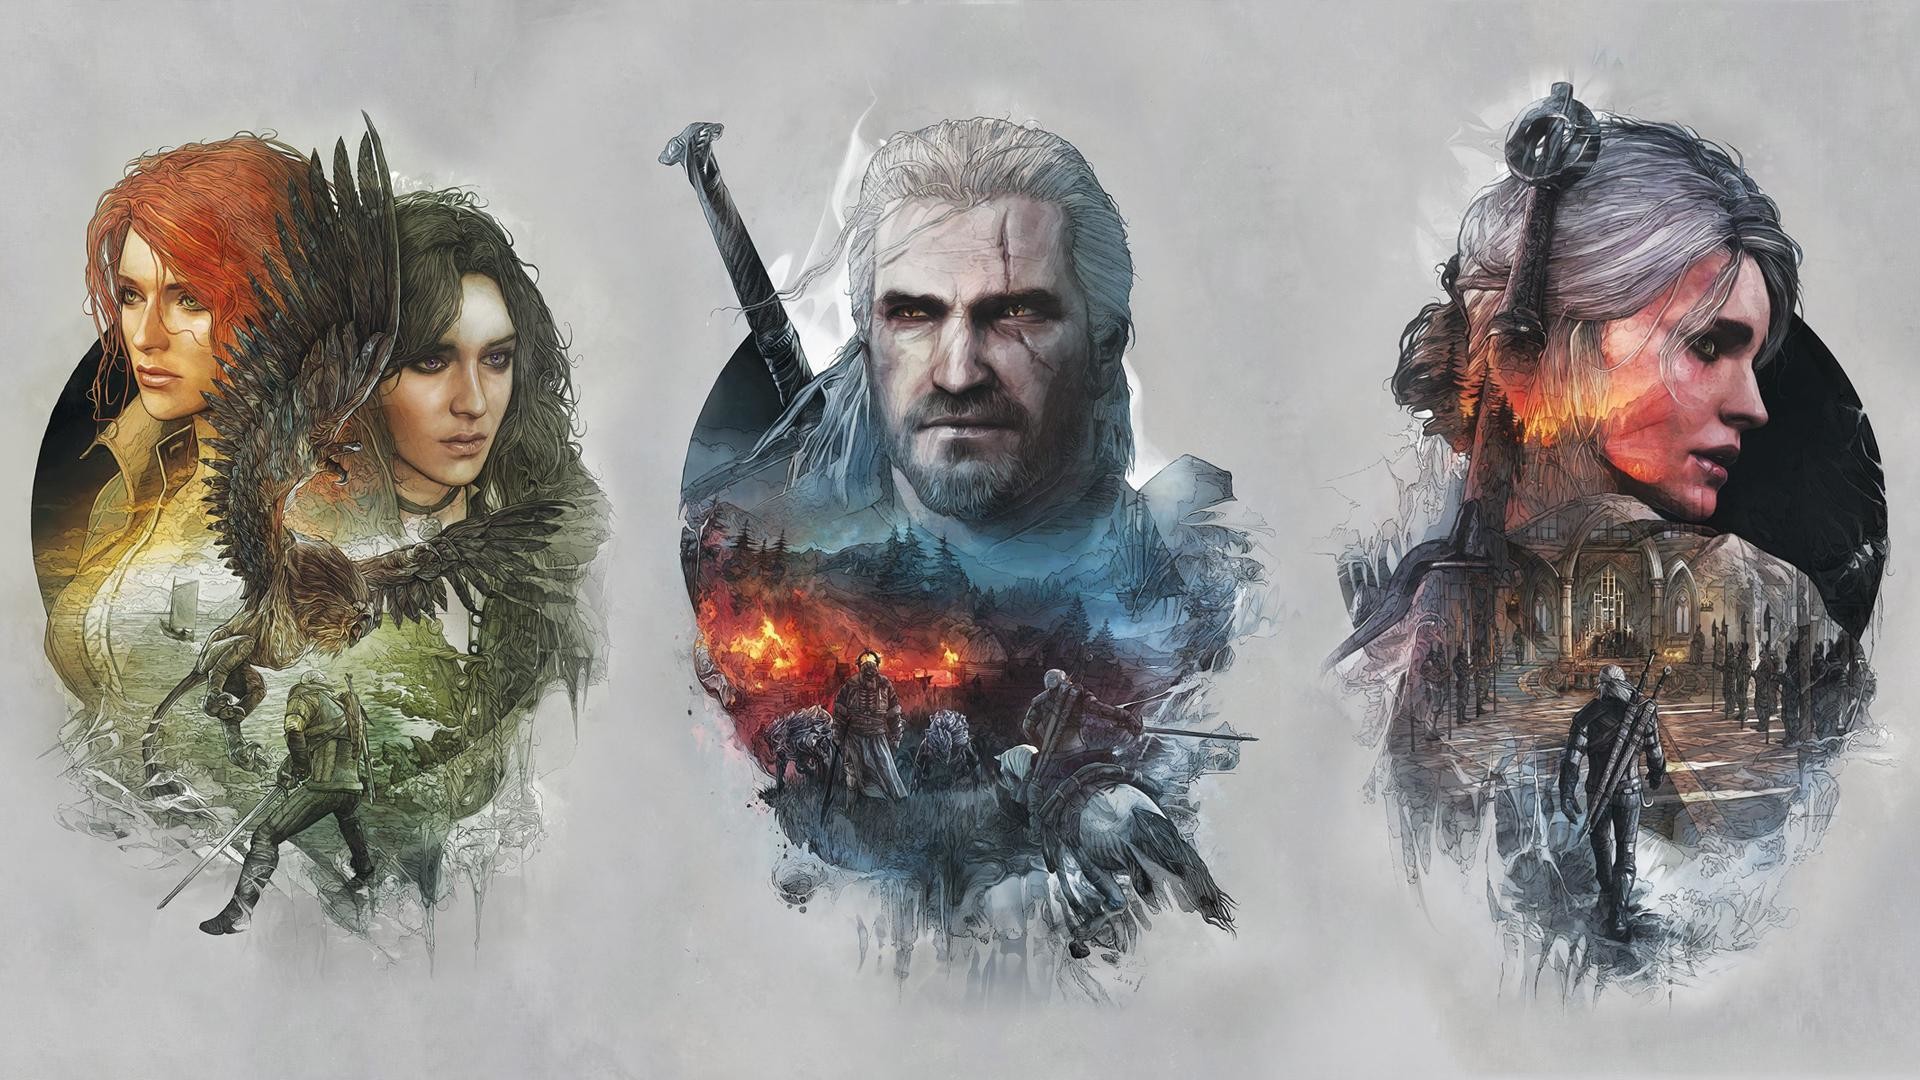 A Witcher 3 Wallpaper I Made By Combining 3 Of The Steelbook .